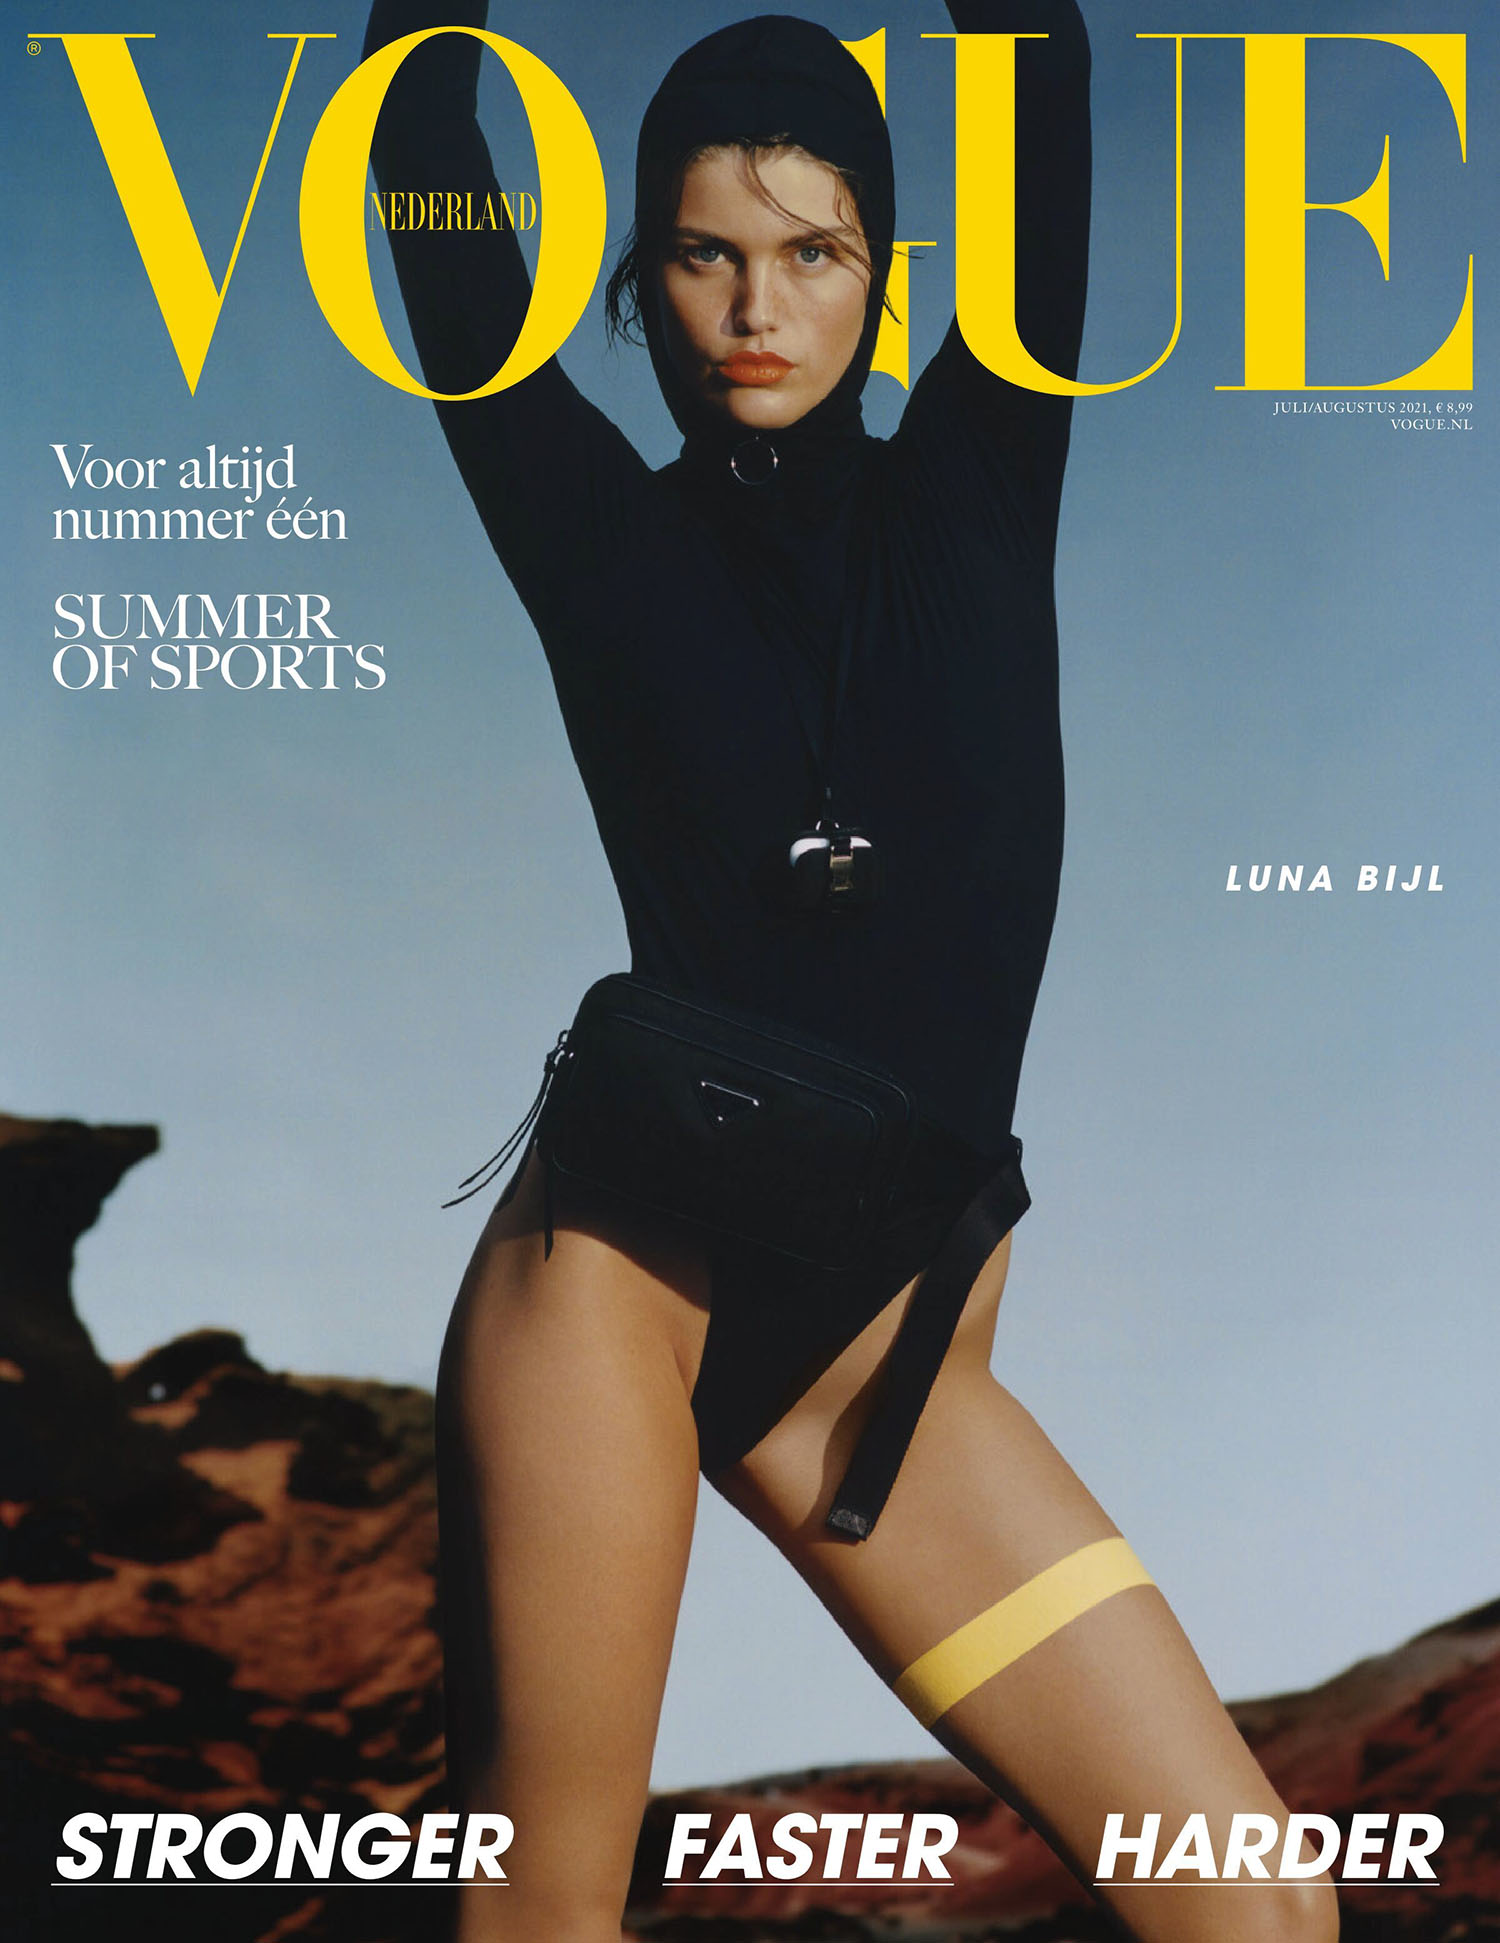 Luna Bijl covers Vogue Netherlands July August 2021 by Charles Negre